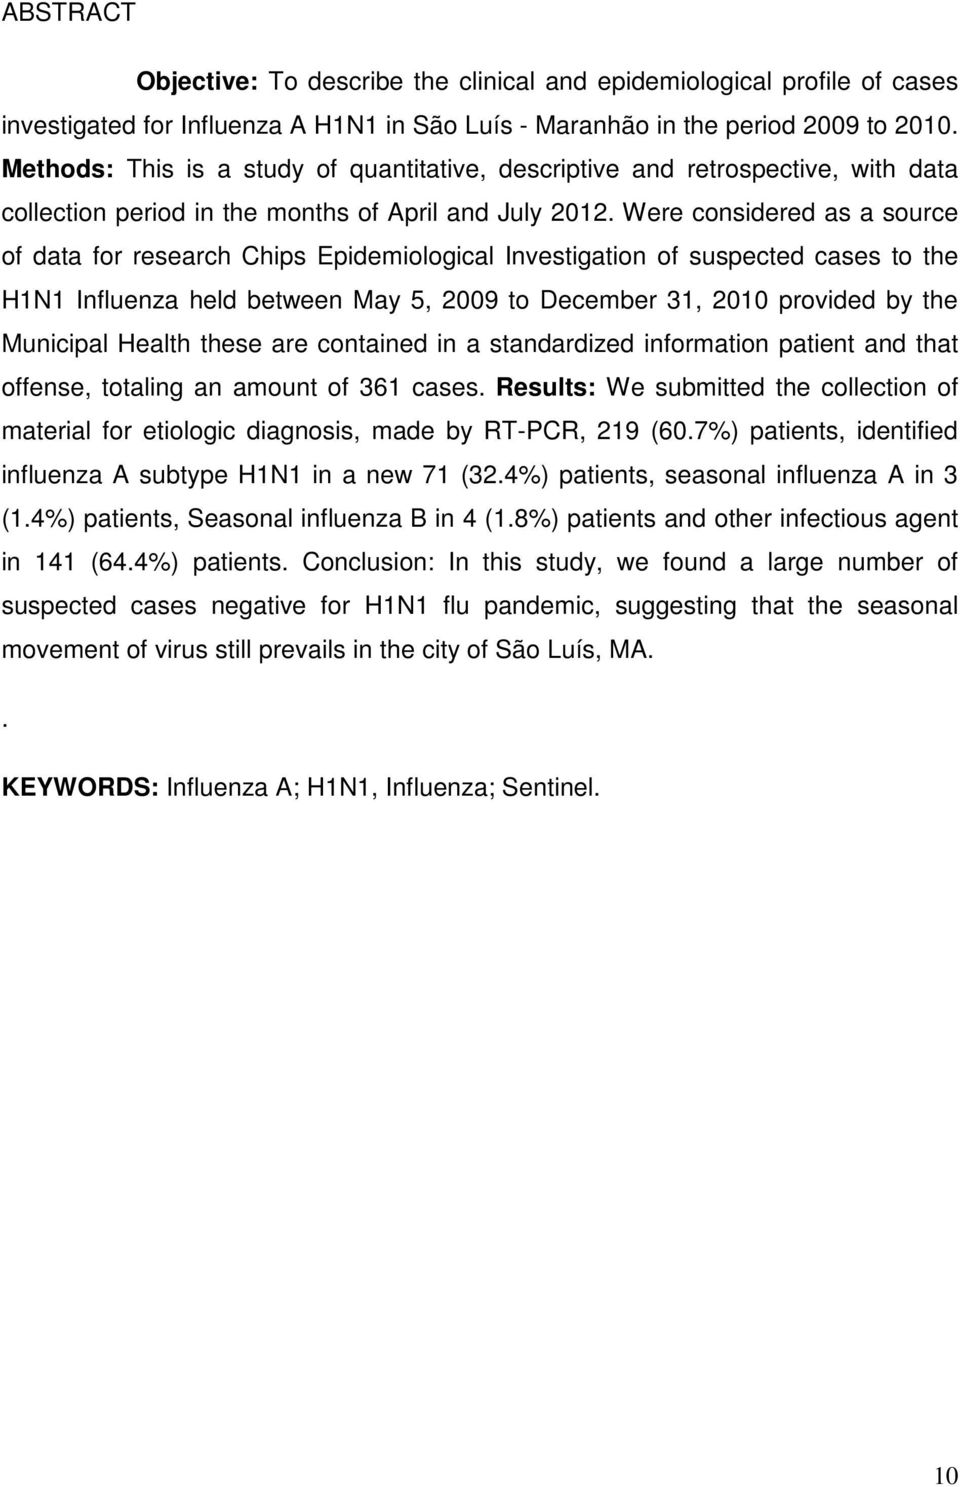 Were considered as a source of data for research Chips Epidemiological Investigation of suspected cases to the H1N1 Influenza held between May 5, 2009 to December 31, 2010 provided by the Municipal